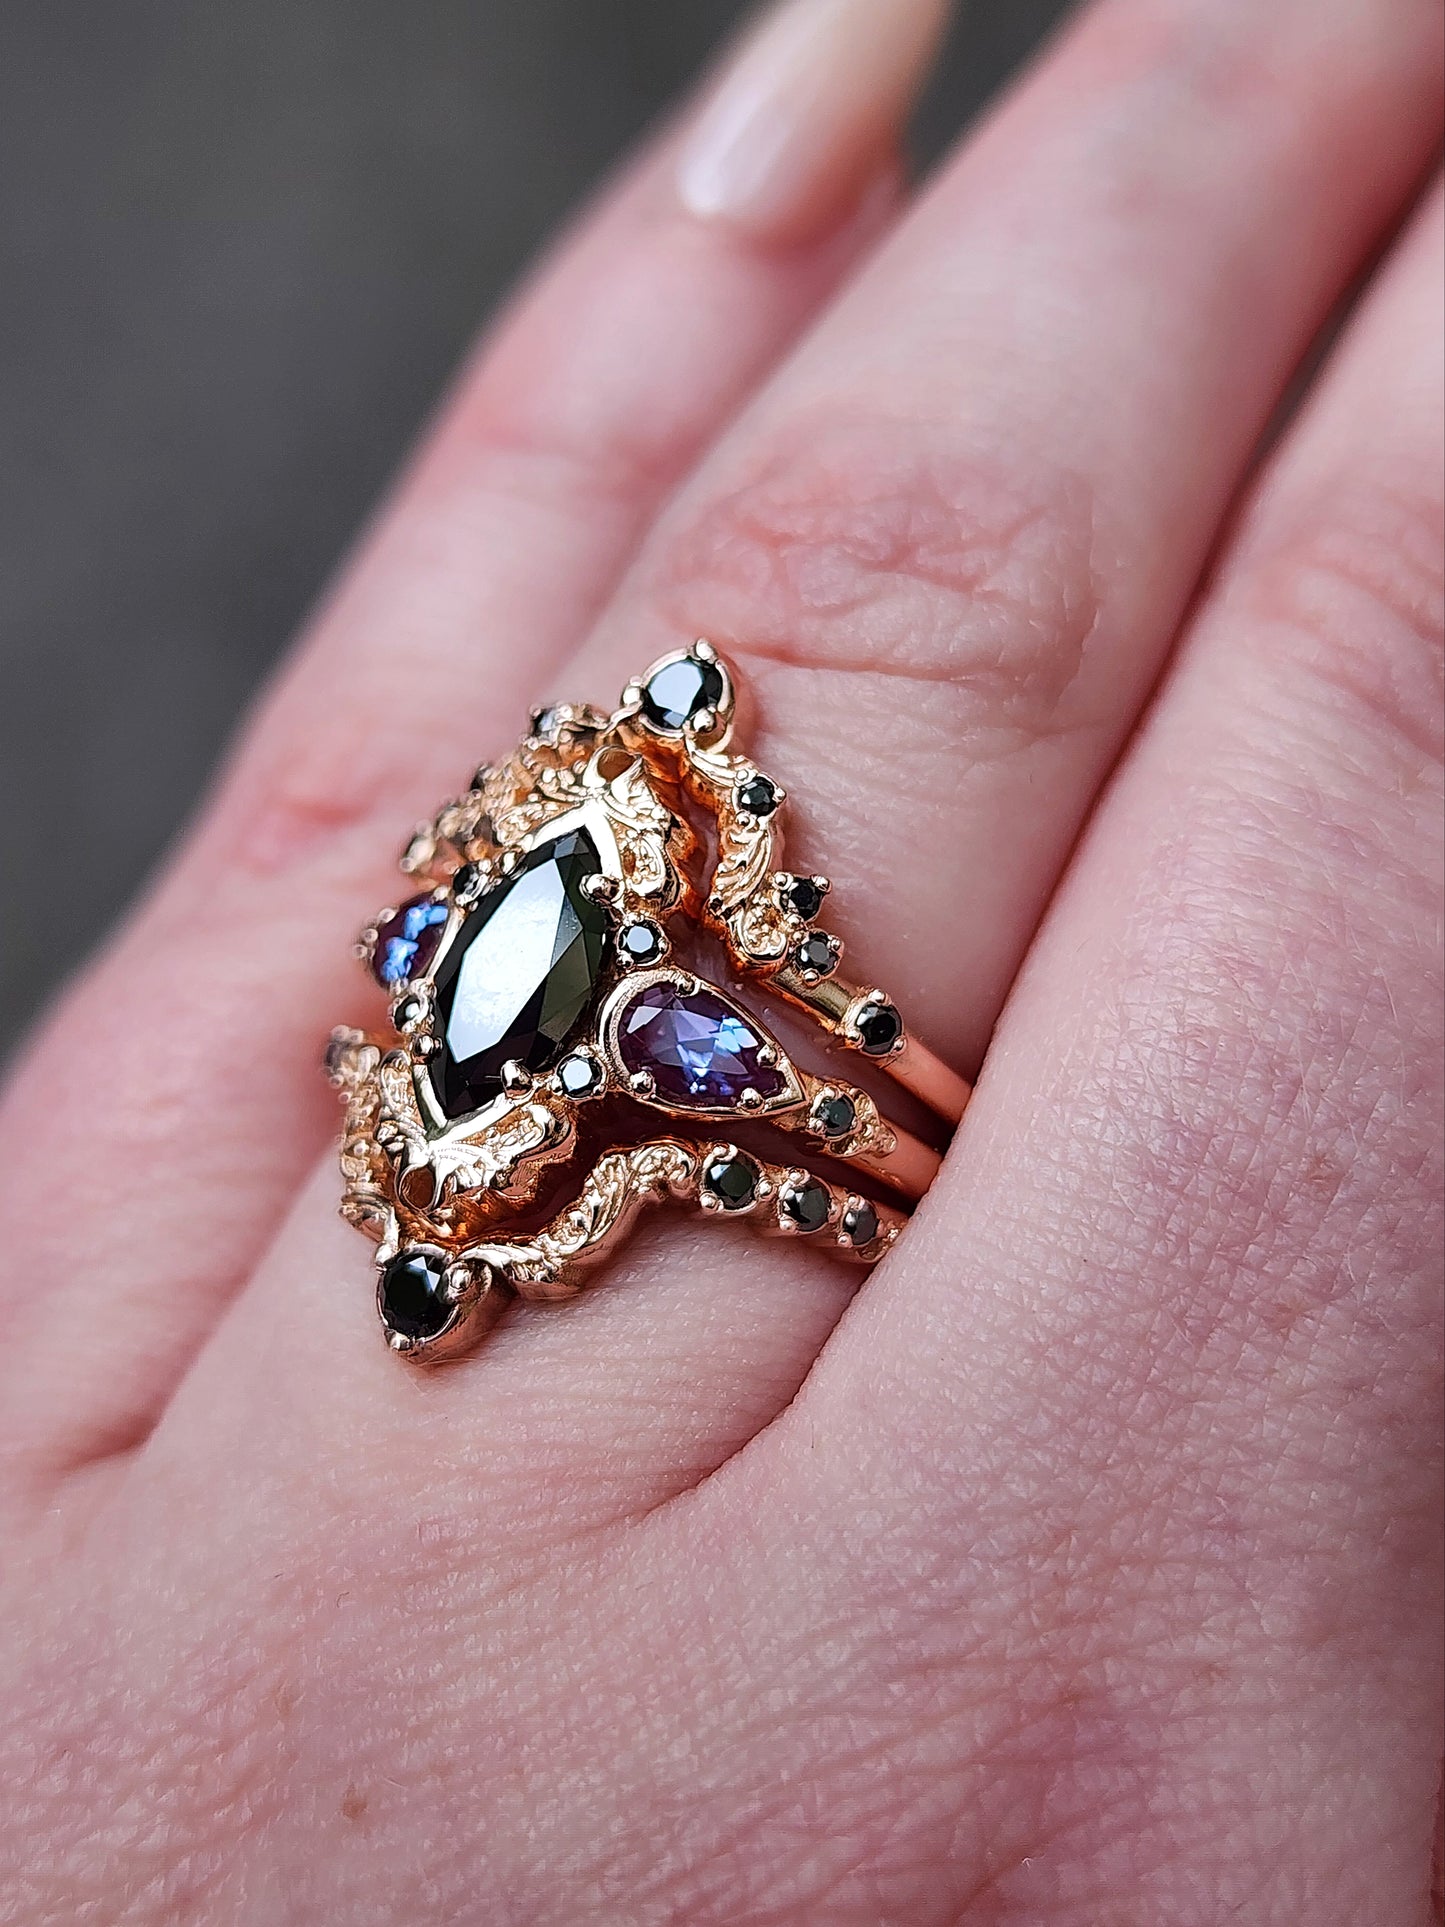 Ready to Ship Size 6-8 Odile Black Diamond Marquise Engagement Ring 3 Piece Set with Pear Side Stones and Gold Scrolls - Gothic Fairytale Dark Romance 14k Rose Gold Handmade Ring